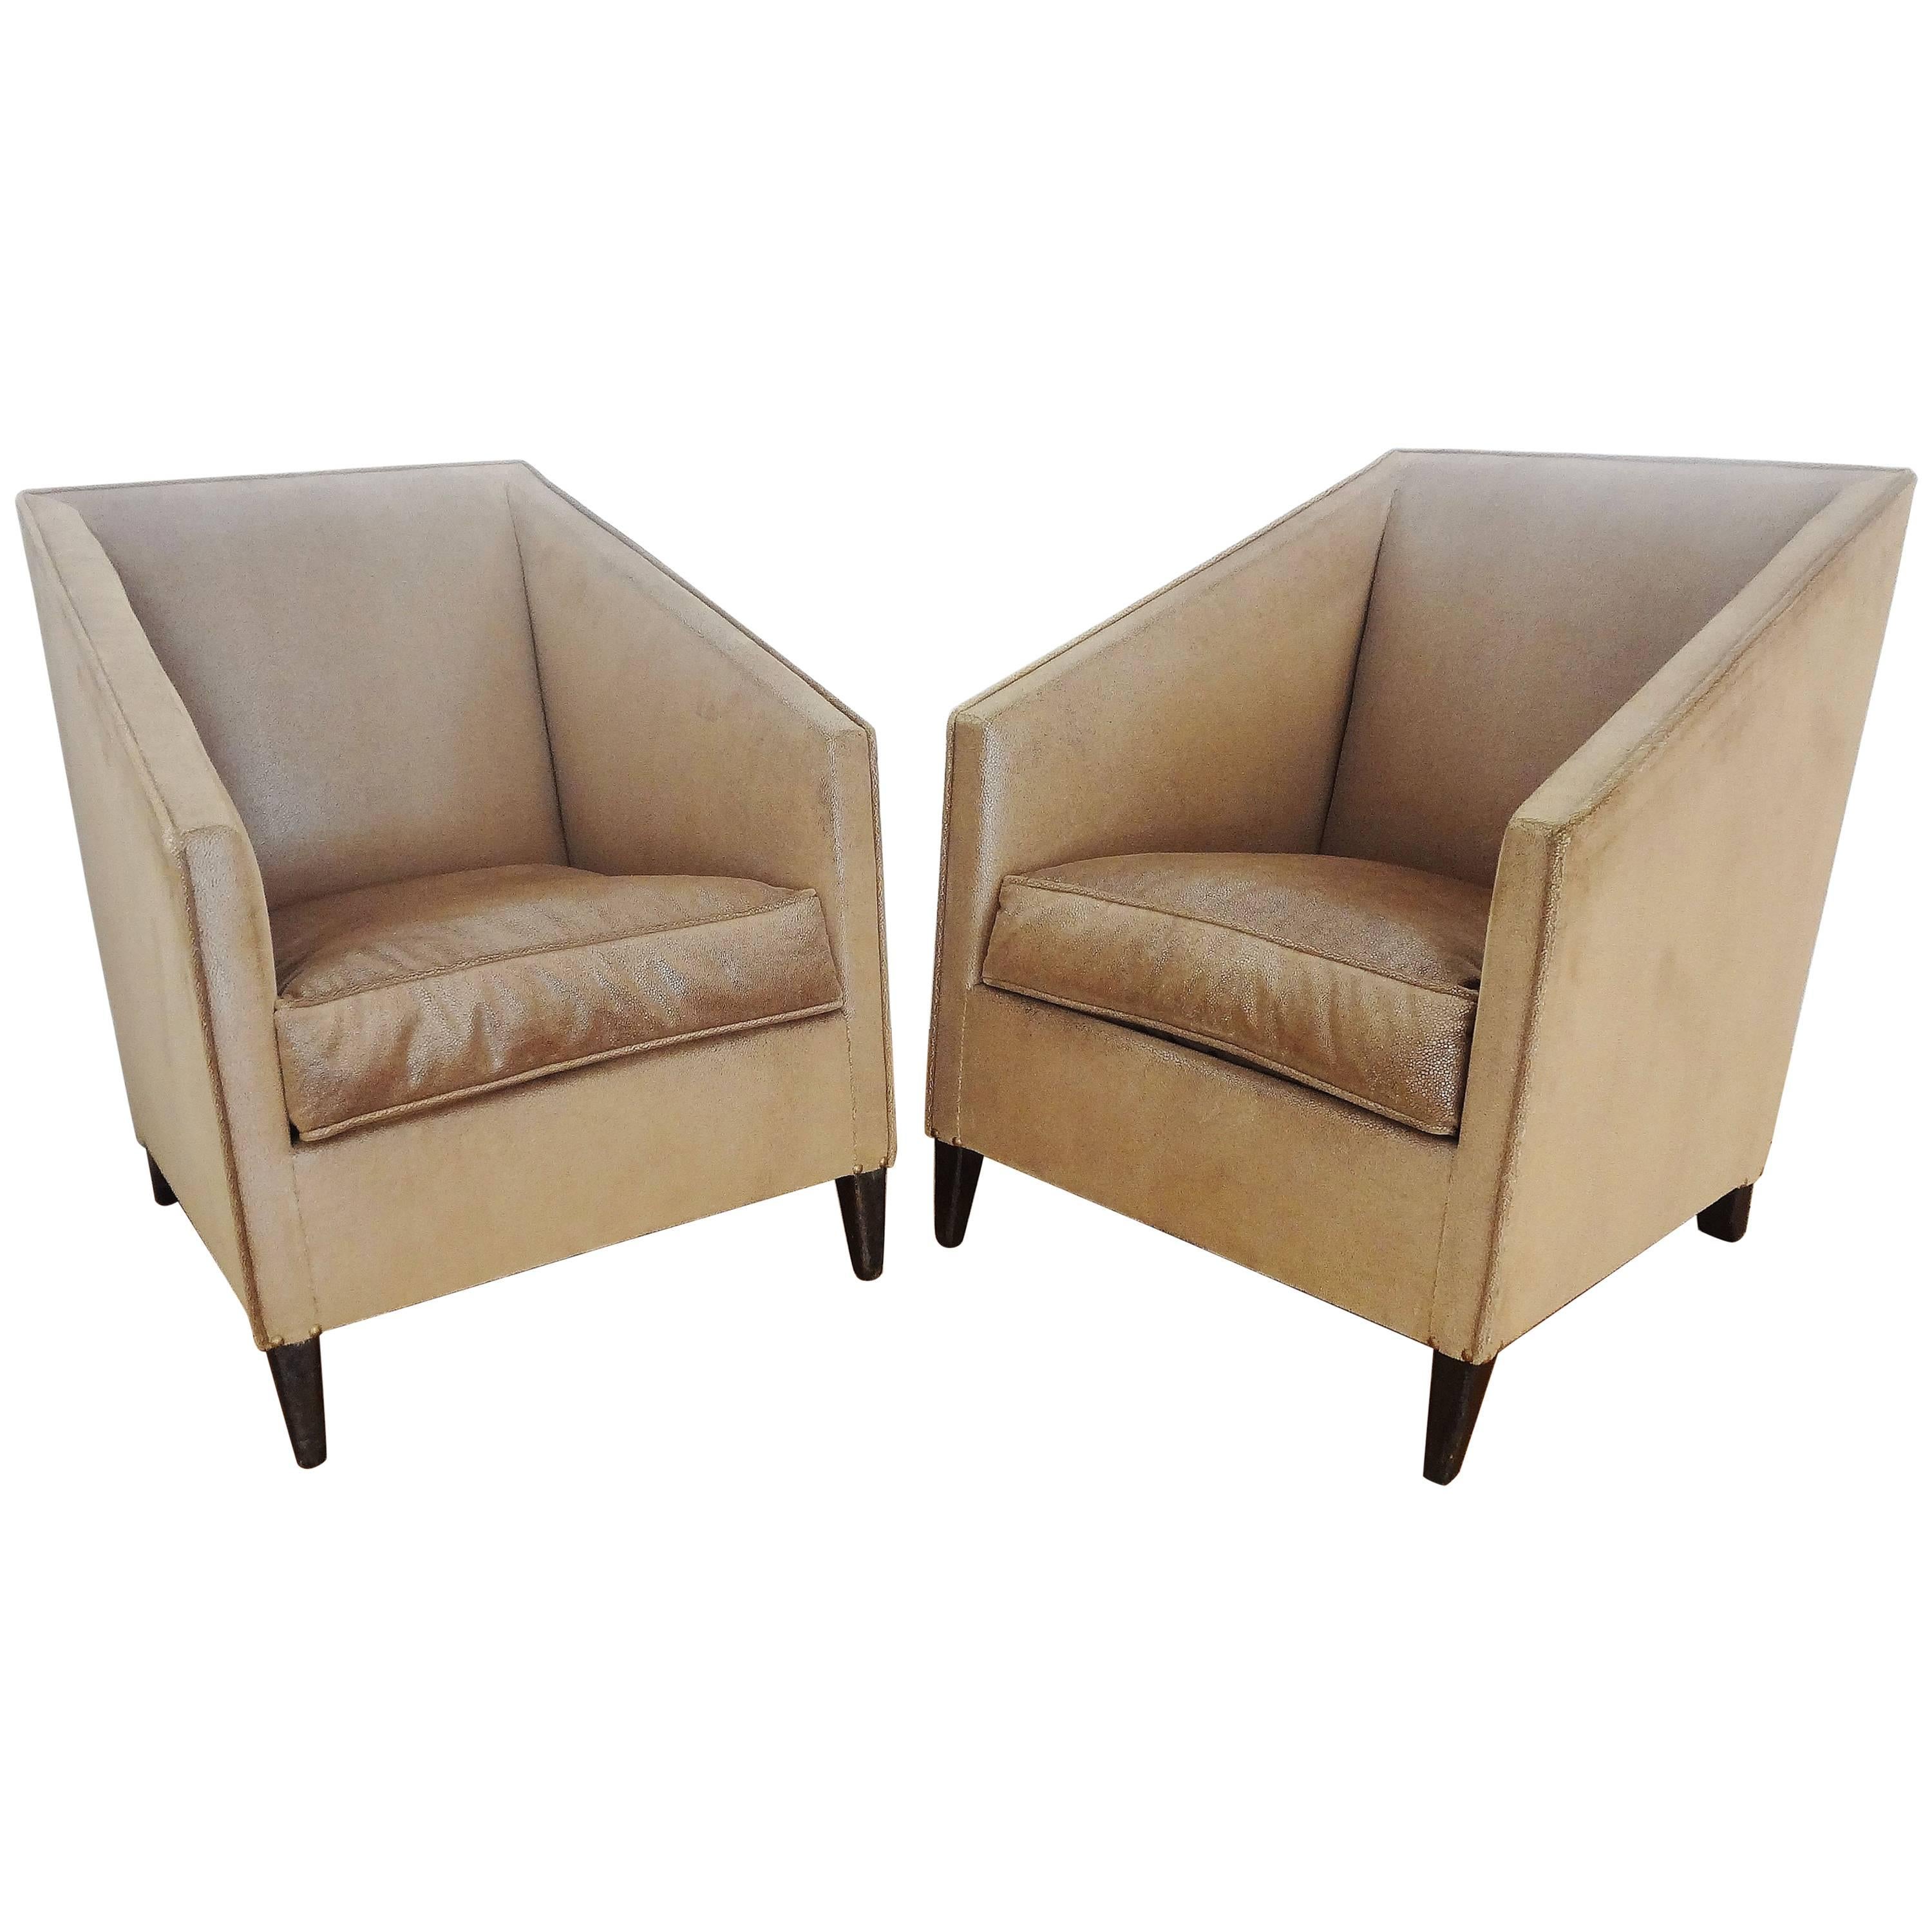 Pair of Modernist Armchairs, 1920s, by Francis Jourdain For Sale